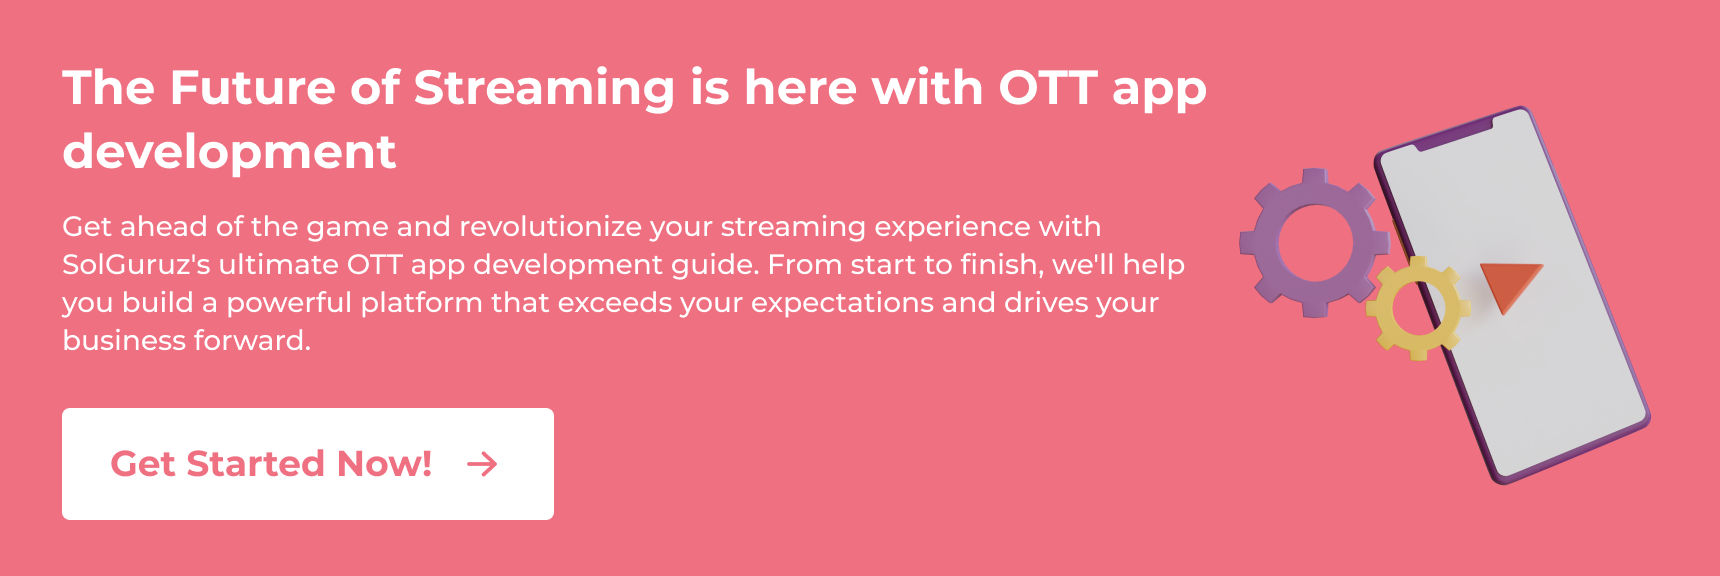 The Future of Streaming is here with Custom OTT app development